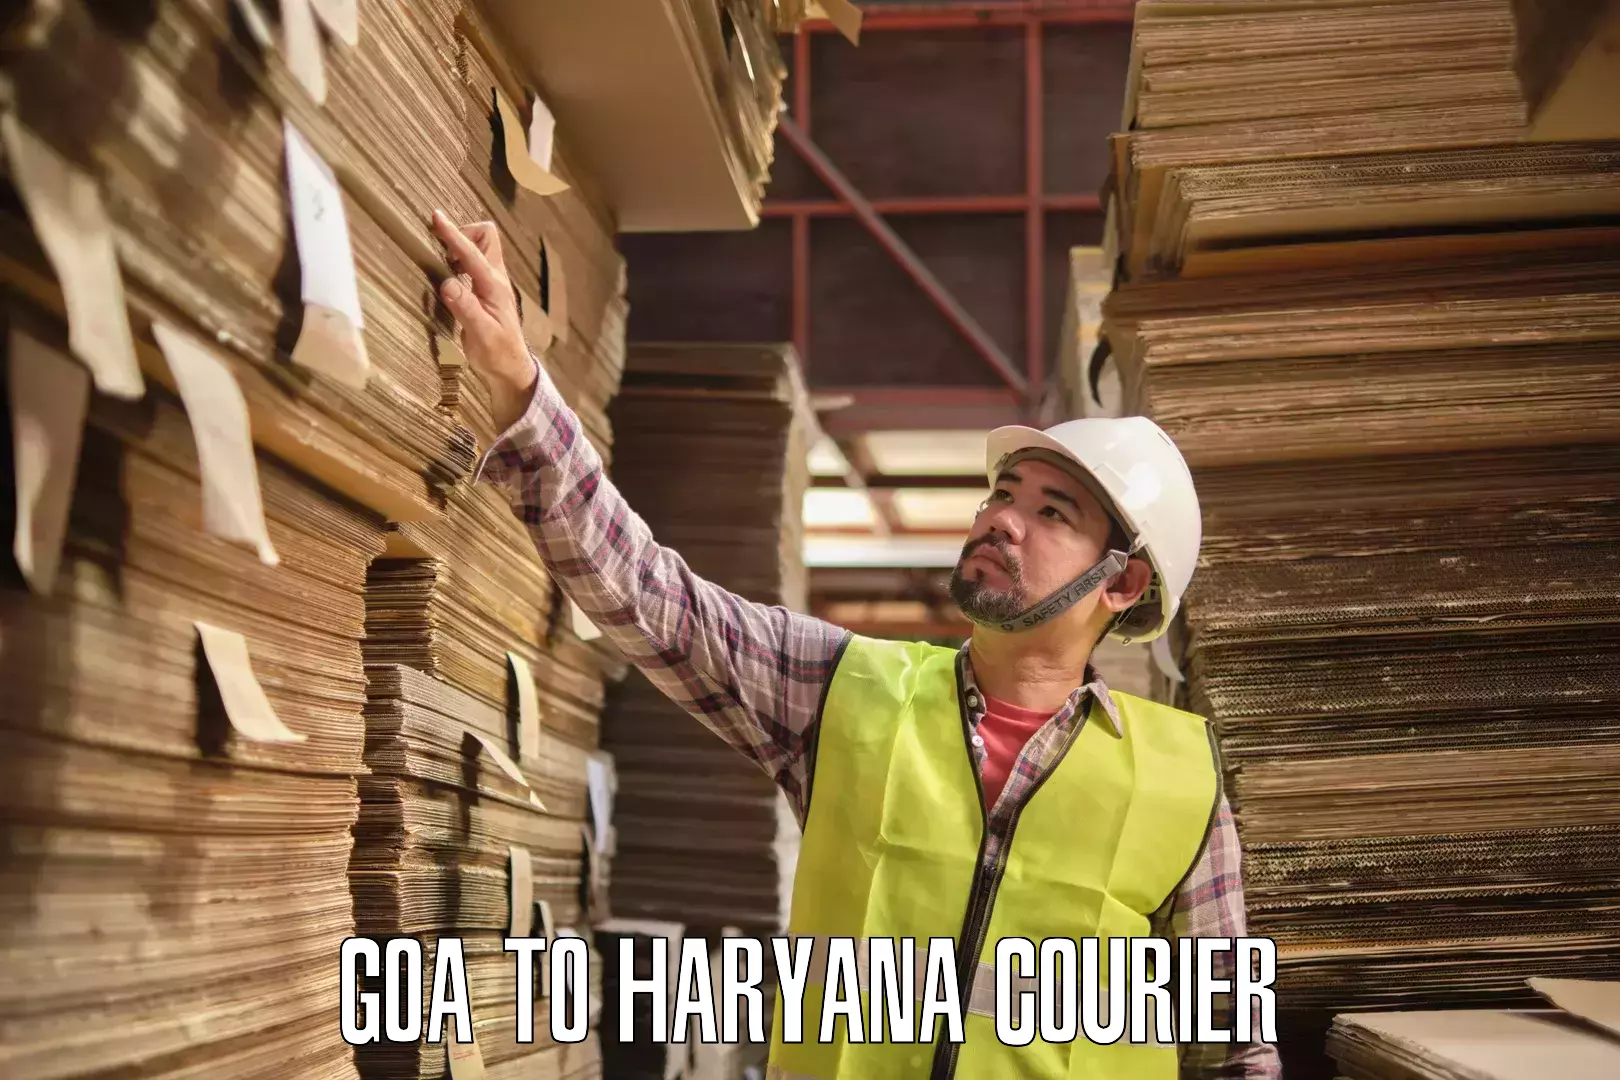 Next-generation courier services Goa to Haryana